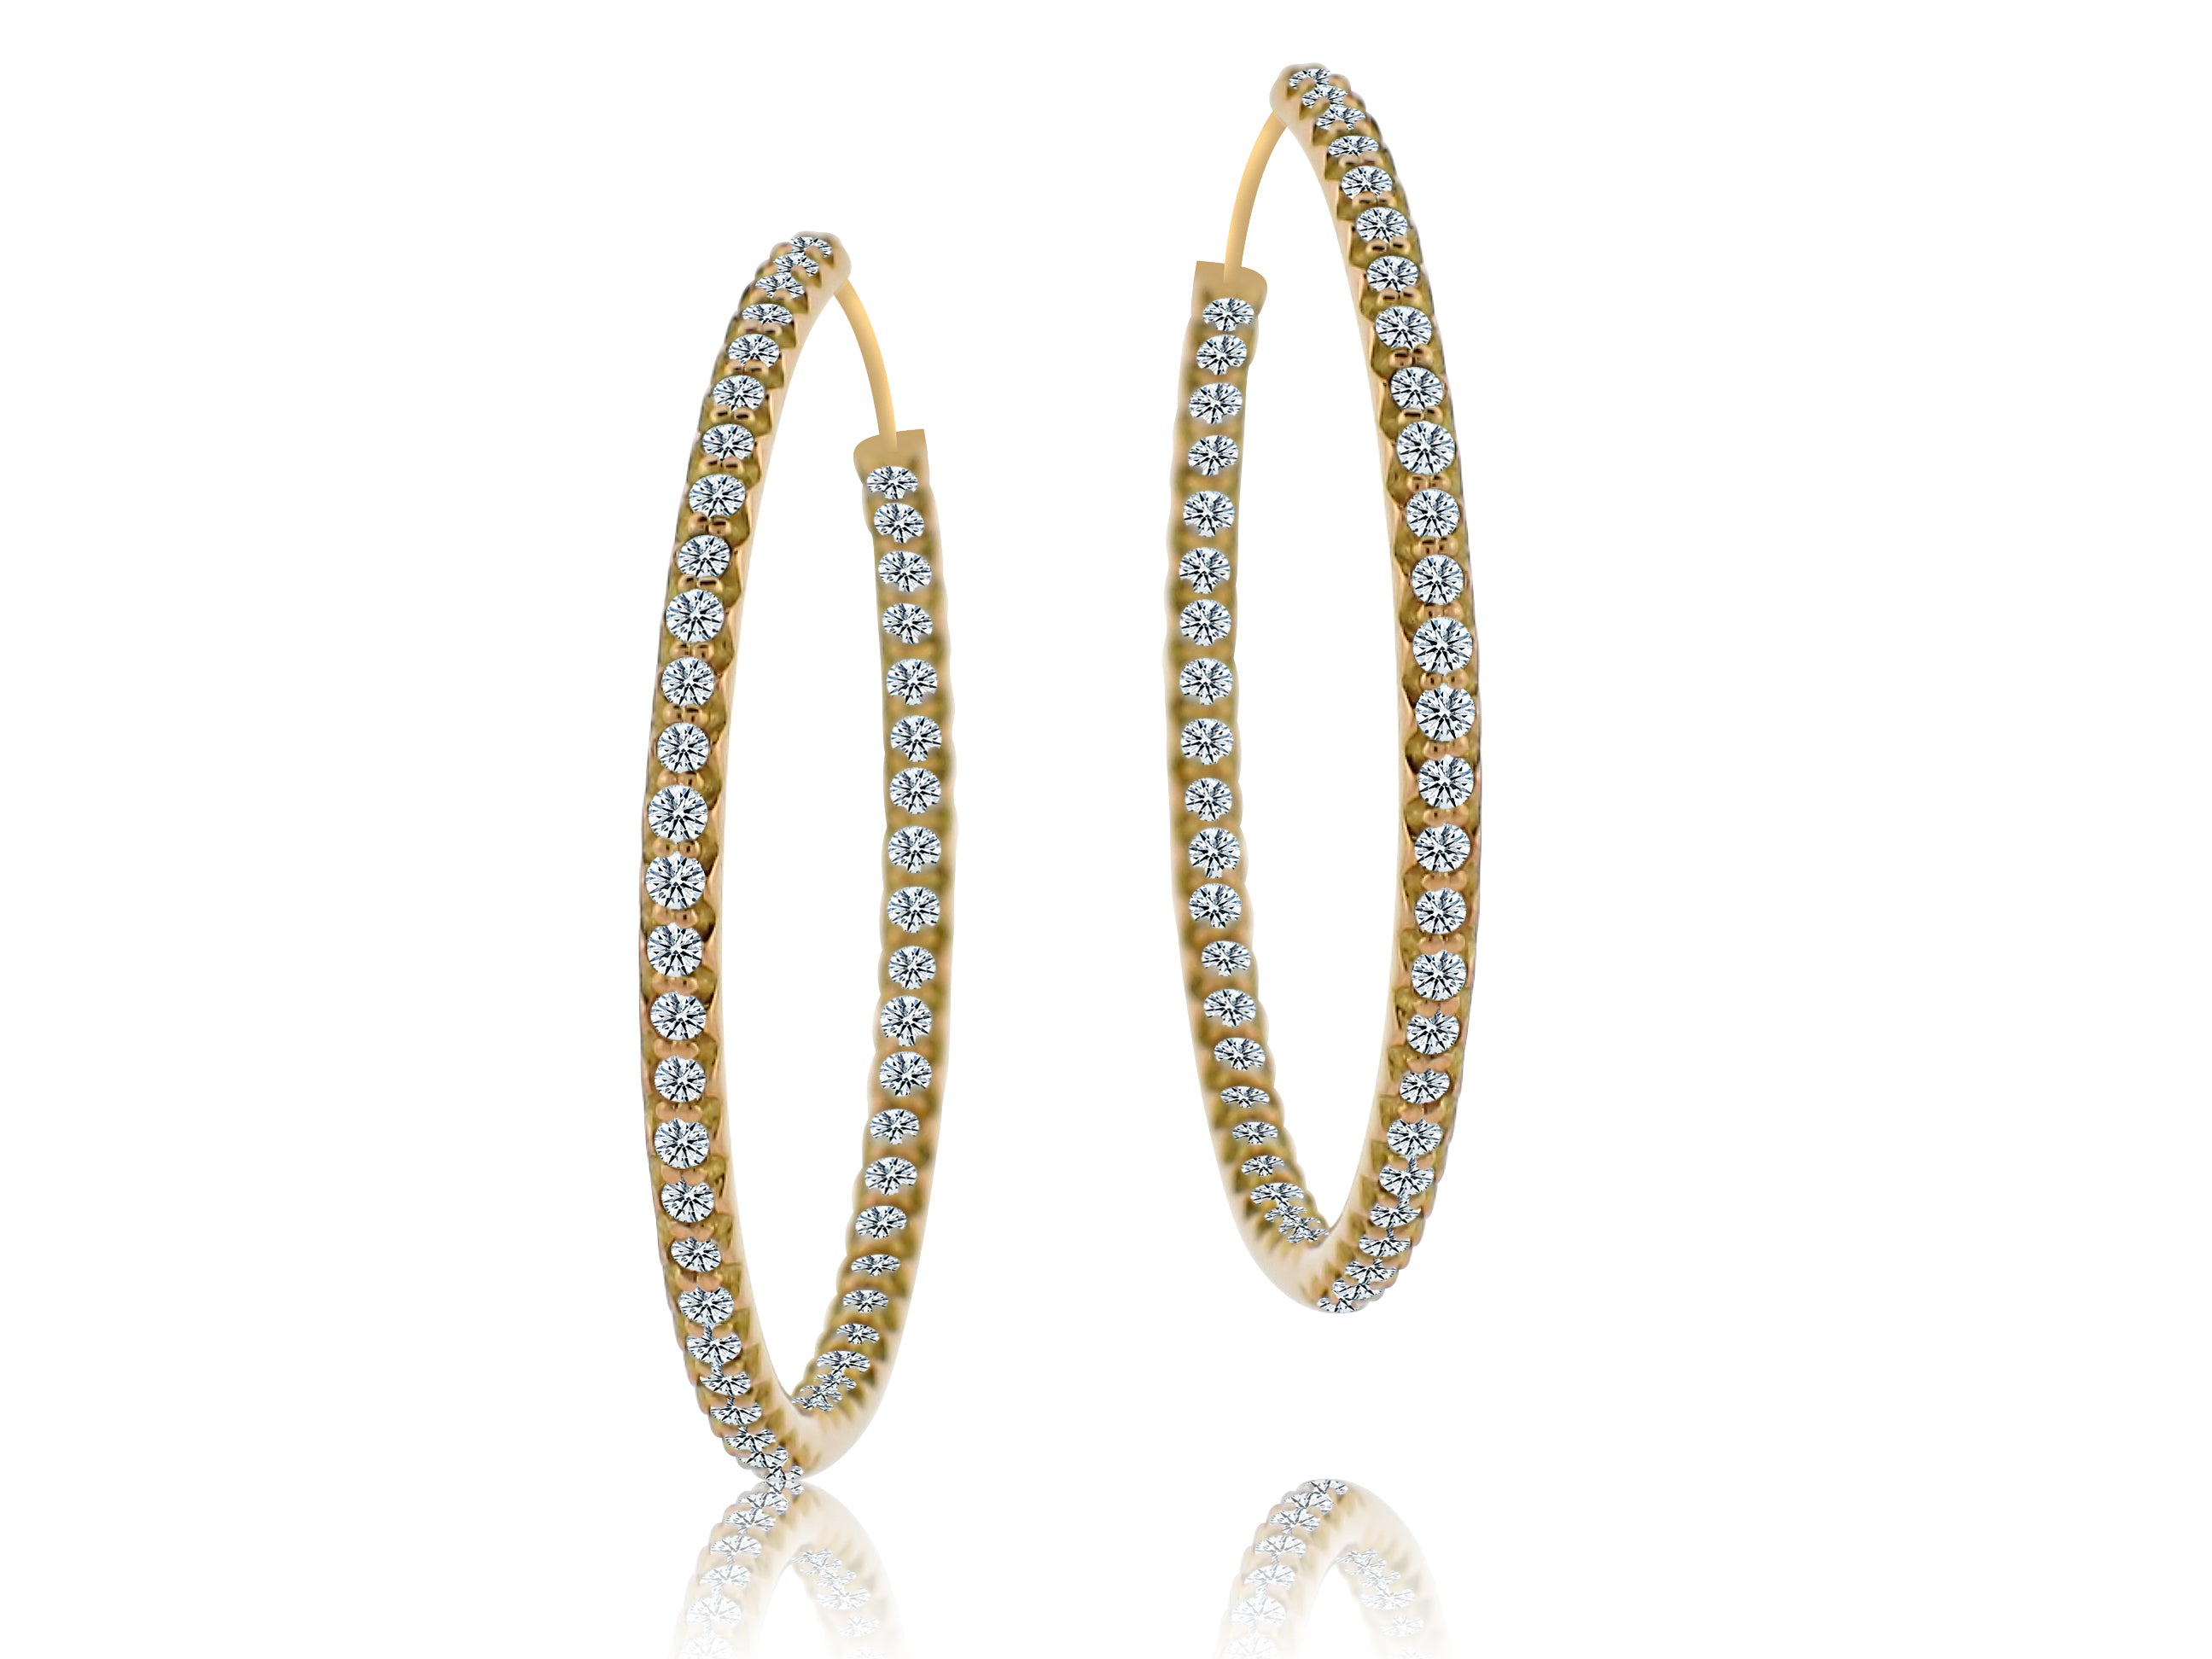 ROBERTO COIN 18K ROSE GOLD 0.98CT SI/G DIAMOND HOOP EARRINGS FROM THE DIAMOND COLLECTION